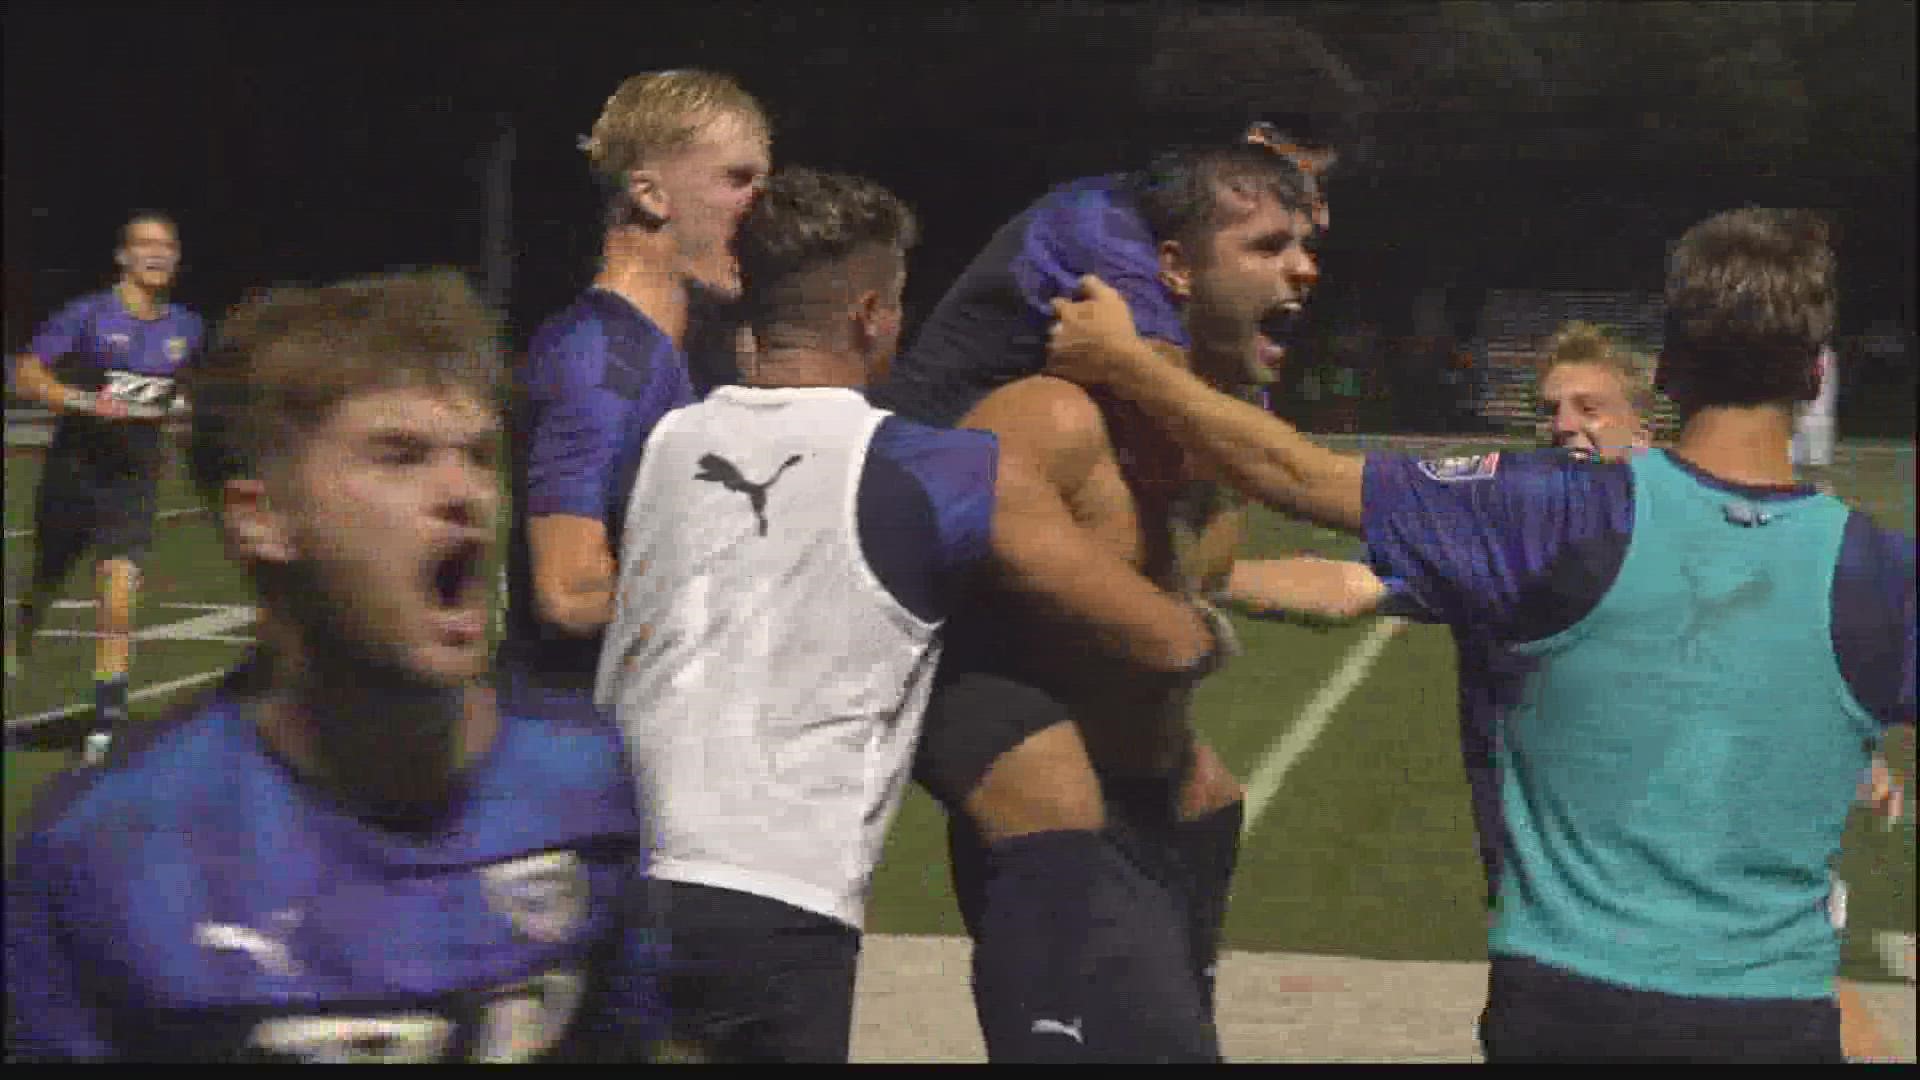 Reed Davis' game-winner in stoppage time helped complete the comeback for the Armada.